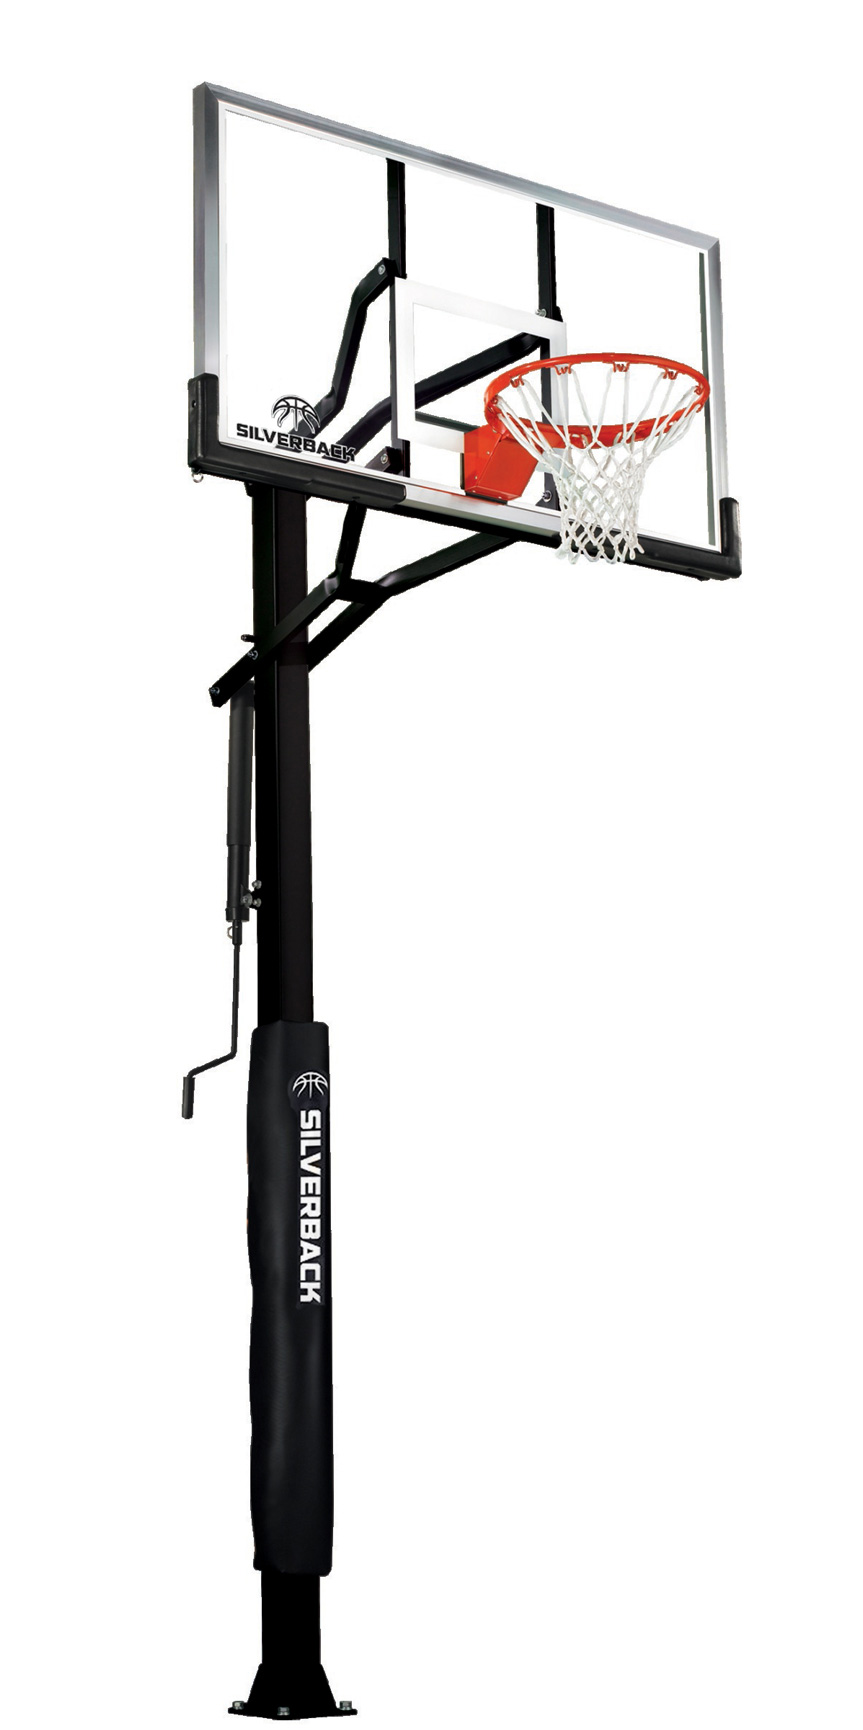 Silverback 60" In-Ground Basketball System with Adjustable-Height Tempered Glass Backboard and Pro-Style Breakaway Rim - image 1 of 23